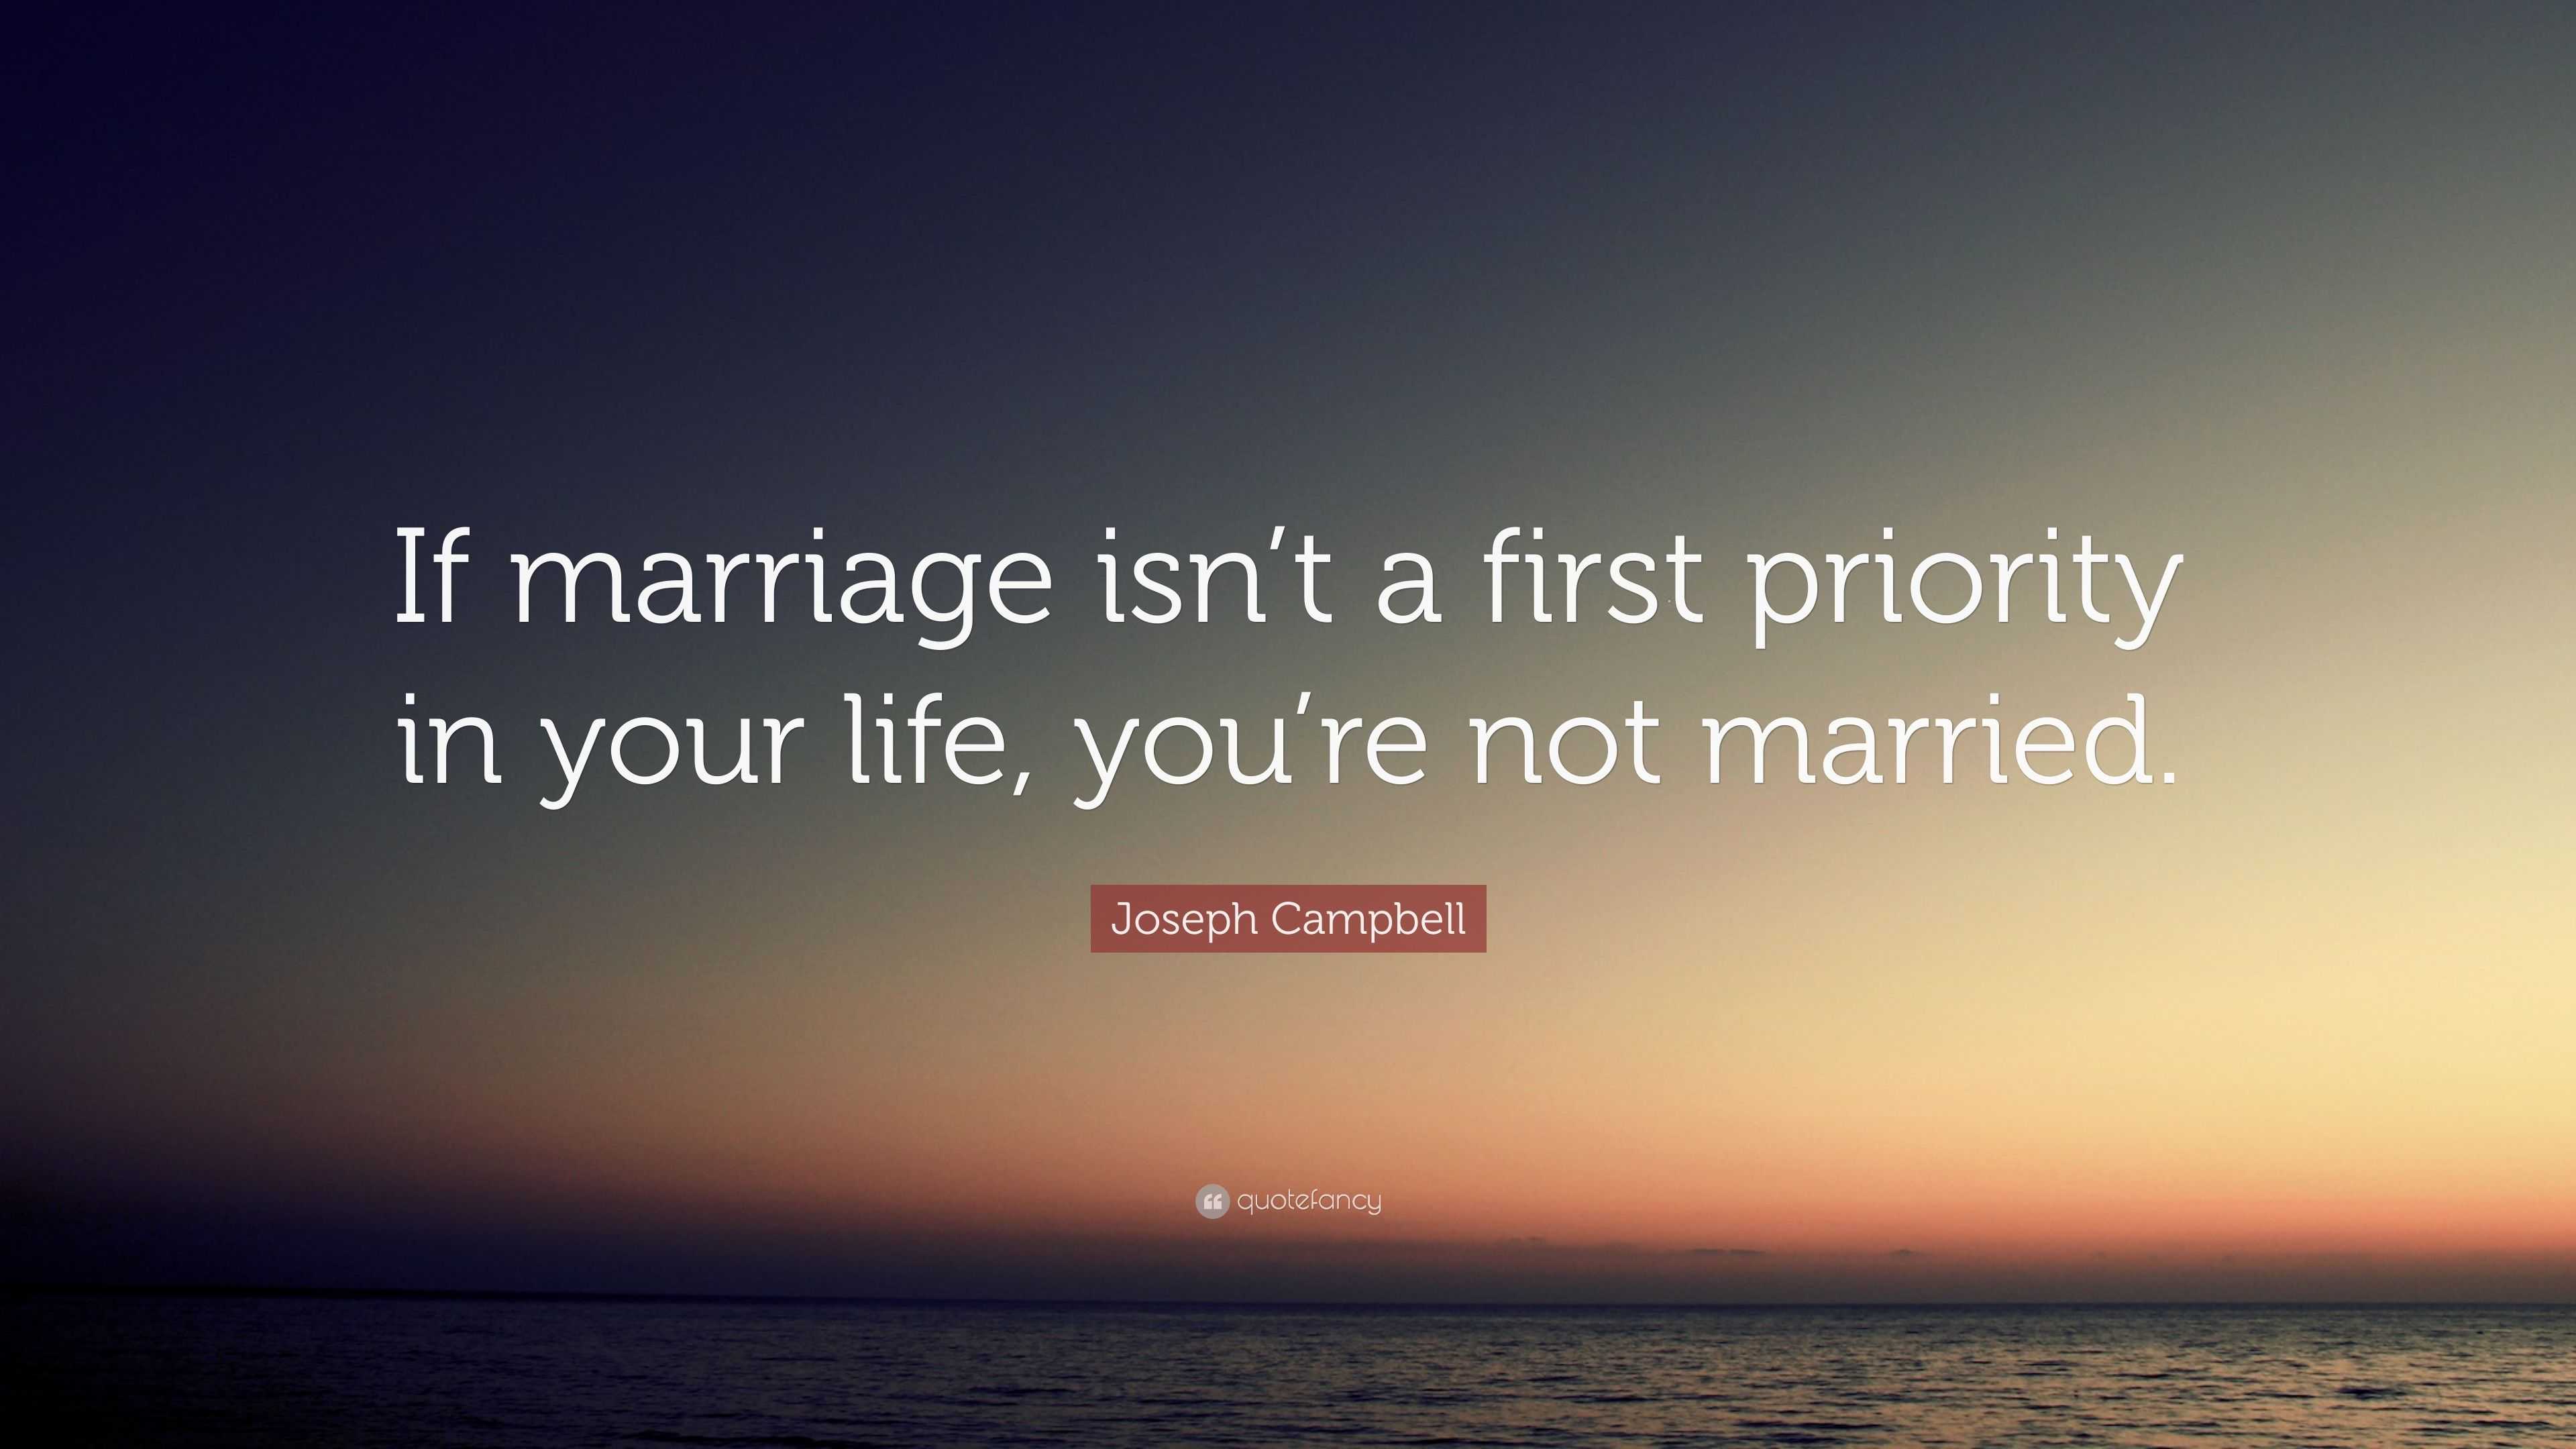 Joseph Campbell Quote: “If marriage isn’t a first priority in your life ...